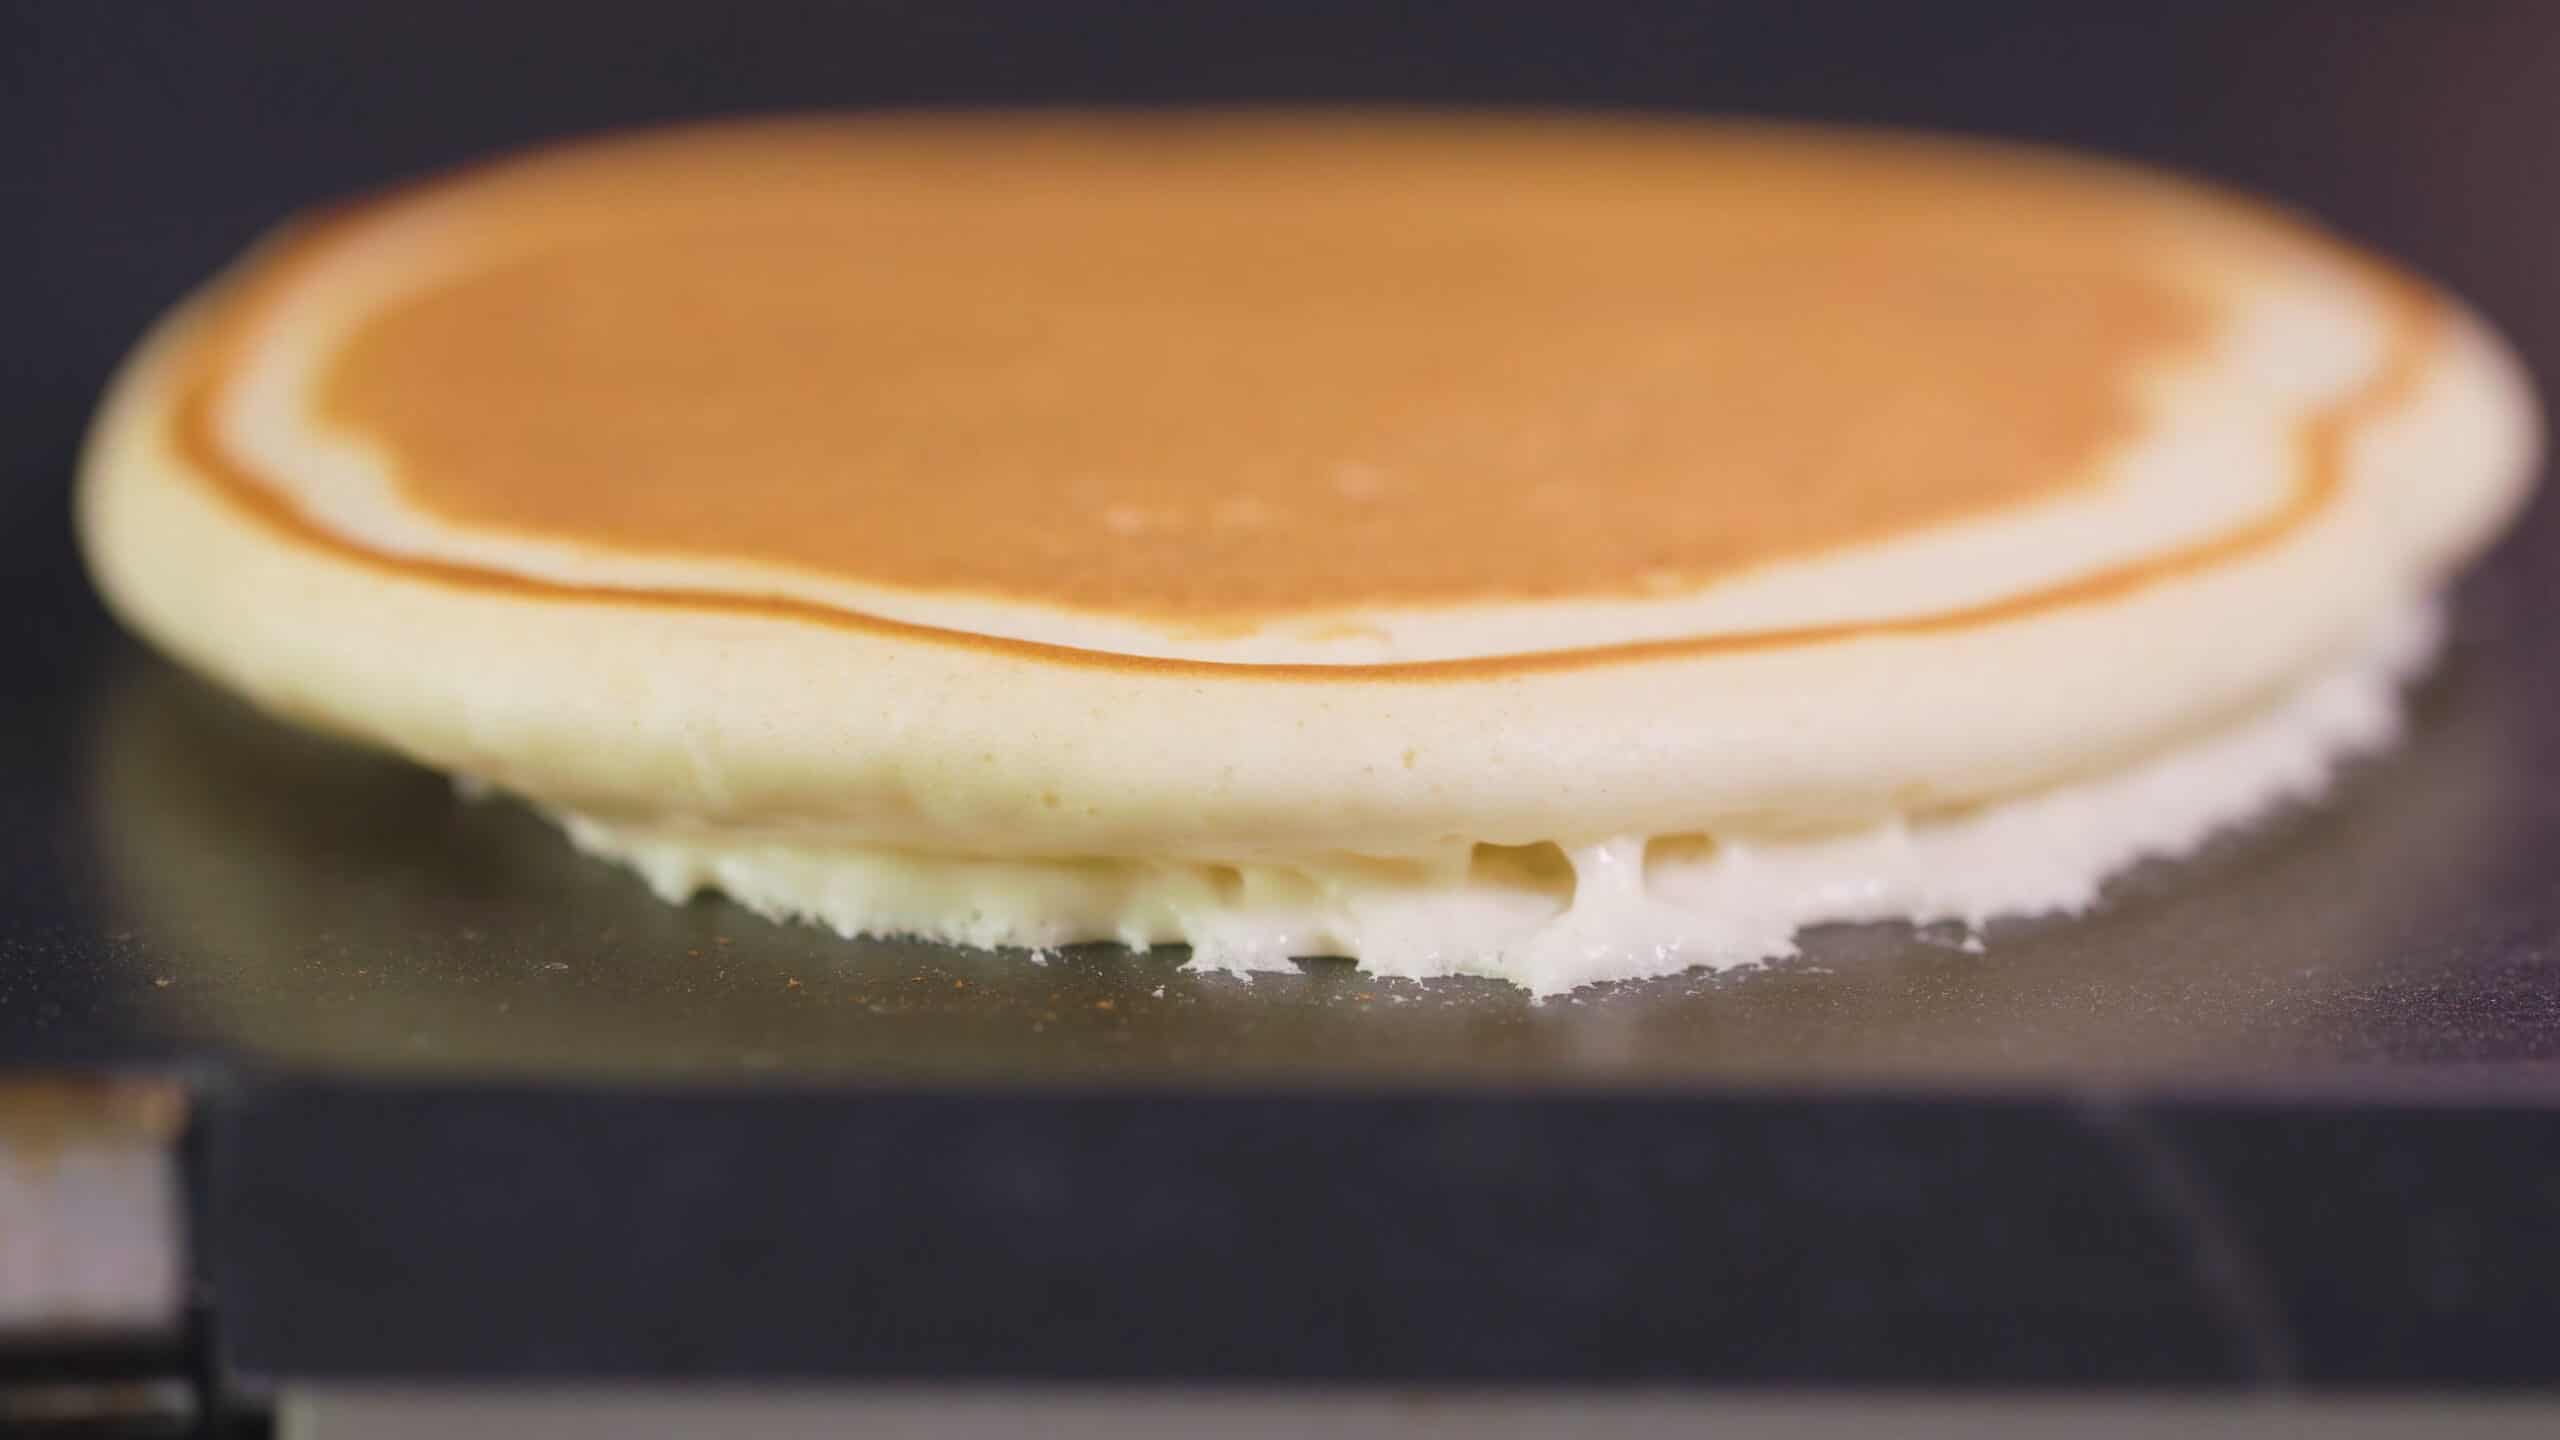 Close-up view of non-stick griddle with a golden brown pancake just flipped to show the perfectly brown side up.